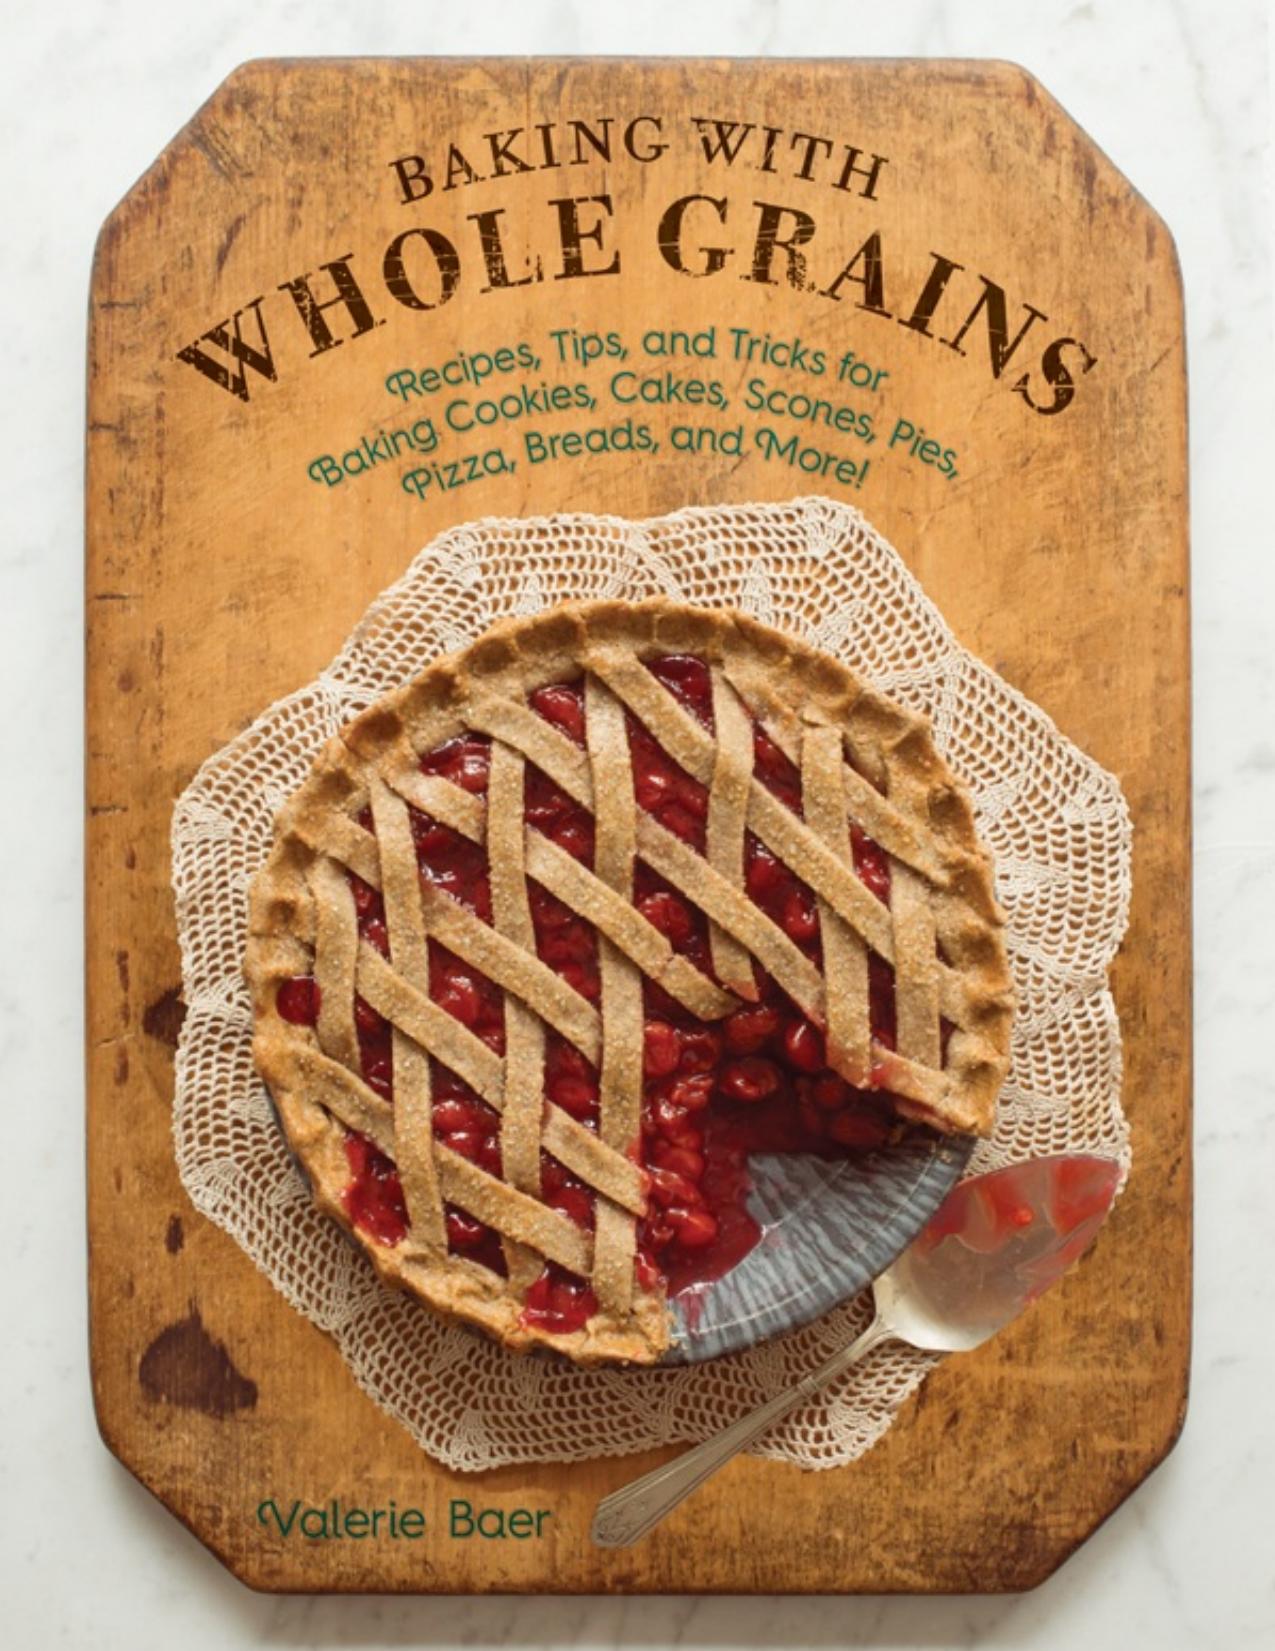 Baking with whole grains : recipes, tips, and tricks for baking cookies, cakes, scones, pies, pizza, breads, and more! - PDFDrive.com